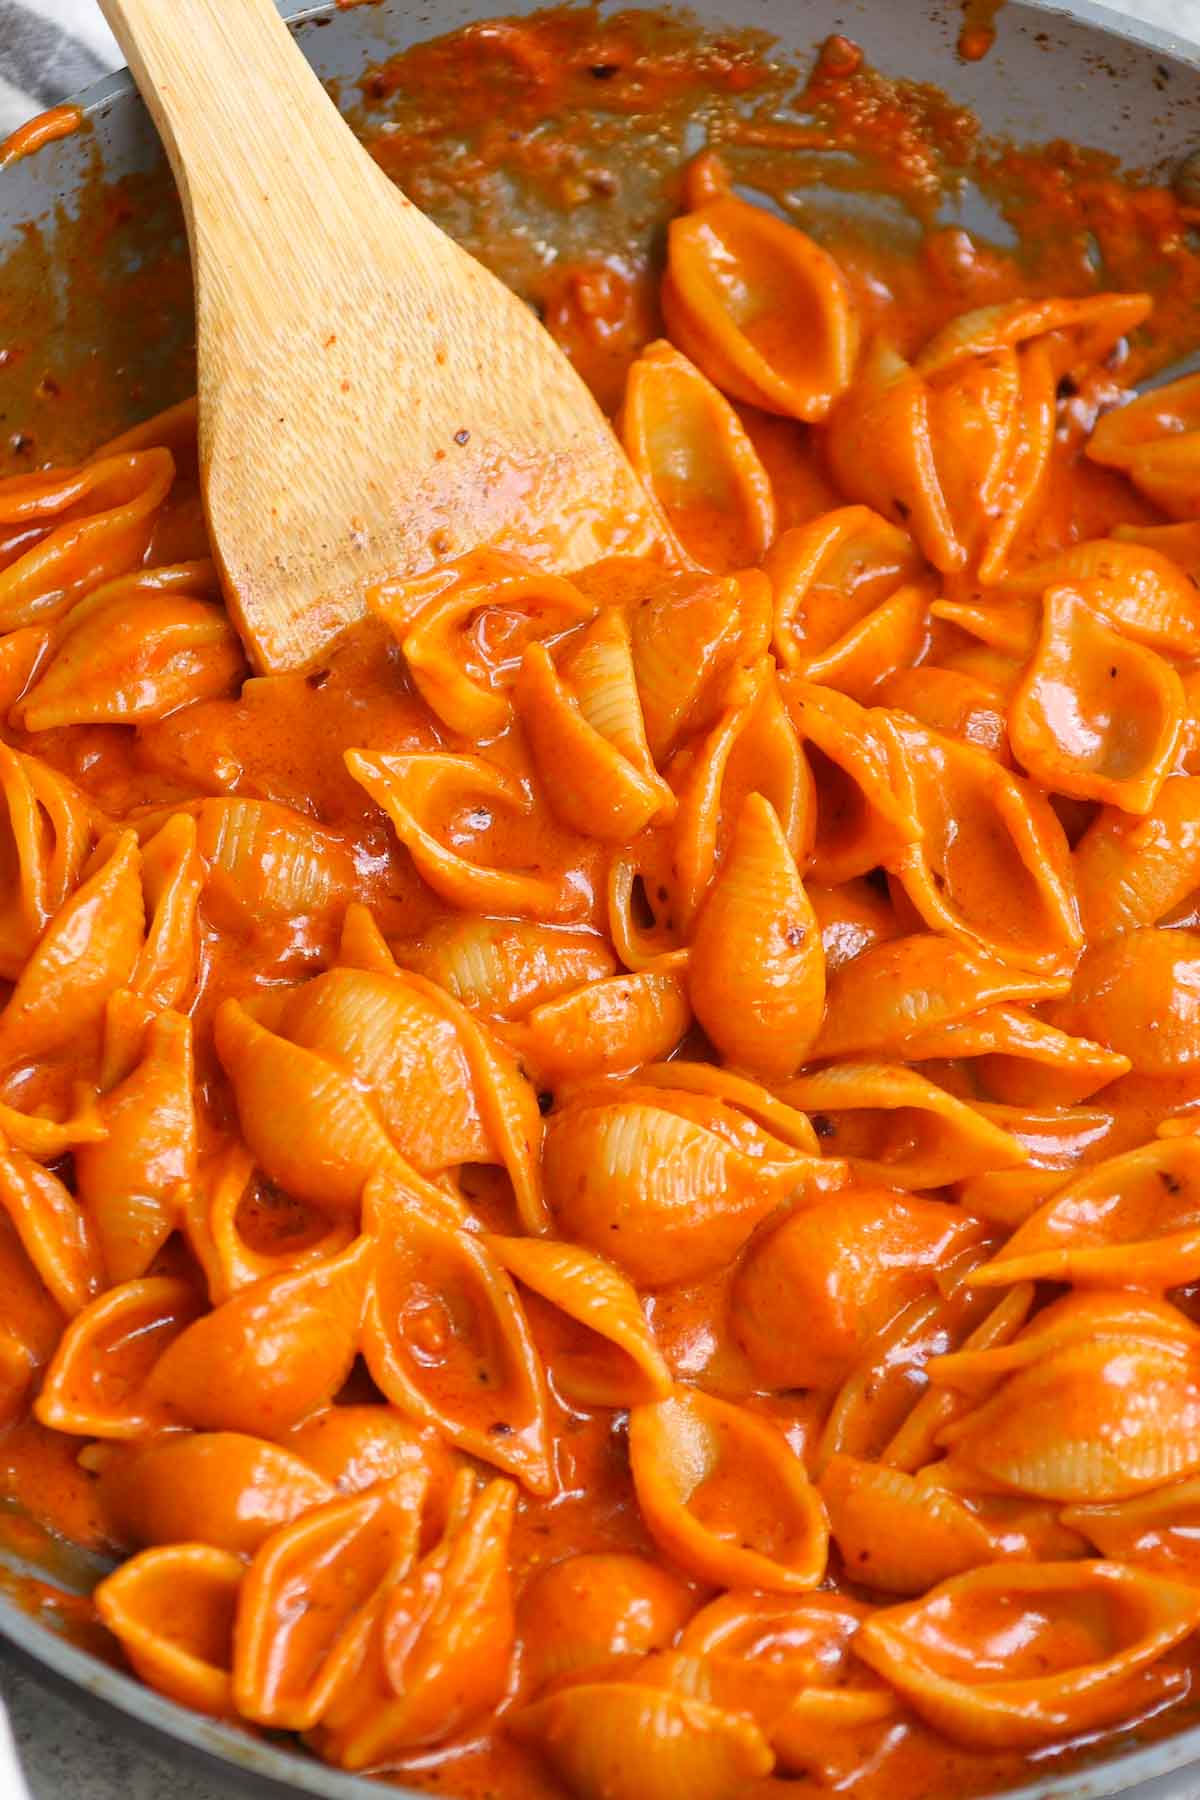 Gigi Hadid Pasta is creamy, cheesy, spicy, mouth-watering, and has taken the internet by storm. Model Gigi Hadid might be known for her talents on the runway, but she certainly rocks the kitchen too. Her simple pasta recipe went viral after she posted it on Tiktok and Instagram, and I promise you it’s worth the hype. Keep reading to find out how to make Gigi Hadid’s Spicy Vodka Sauce (spice and vodka optional).